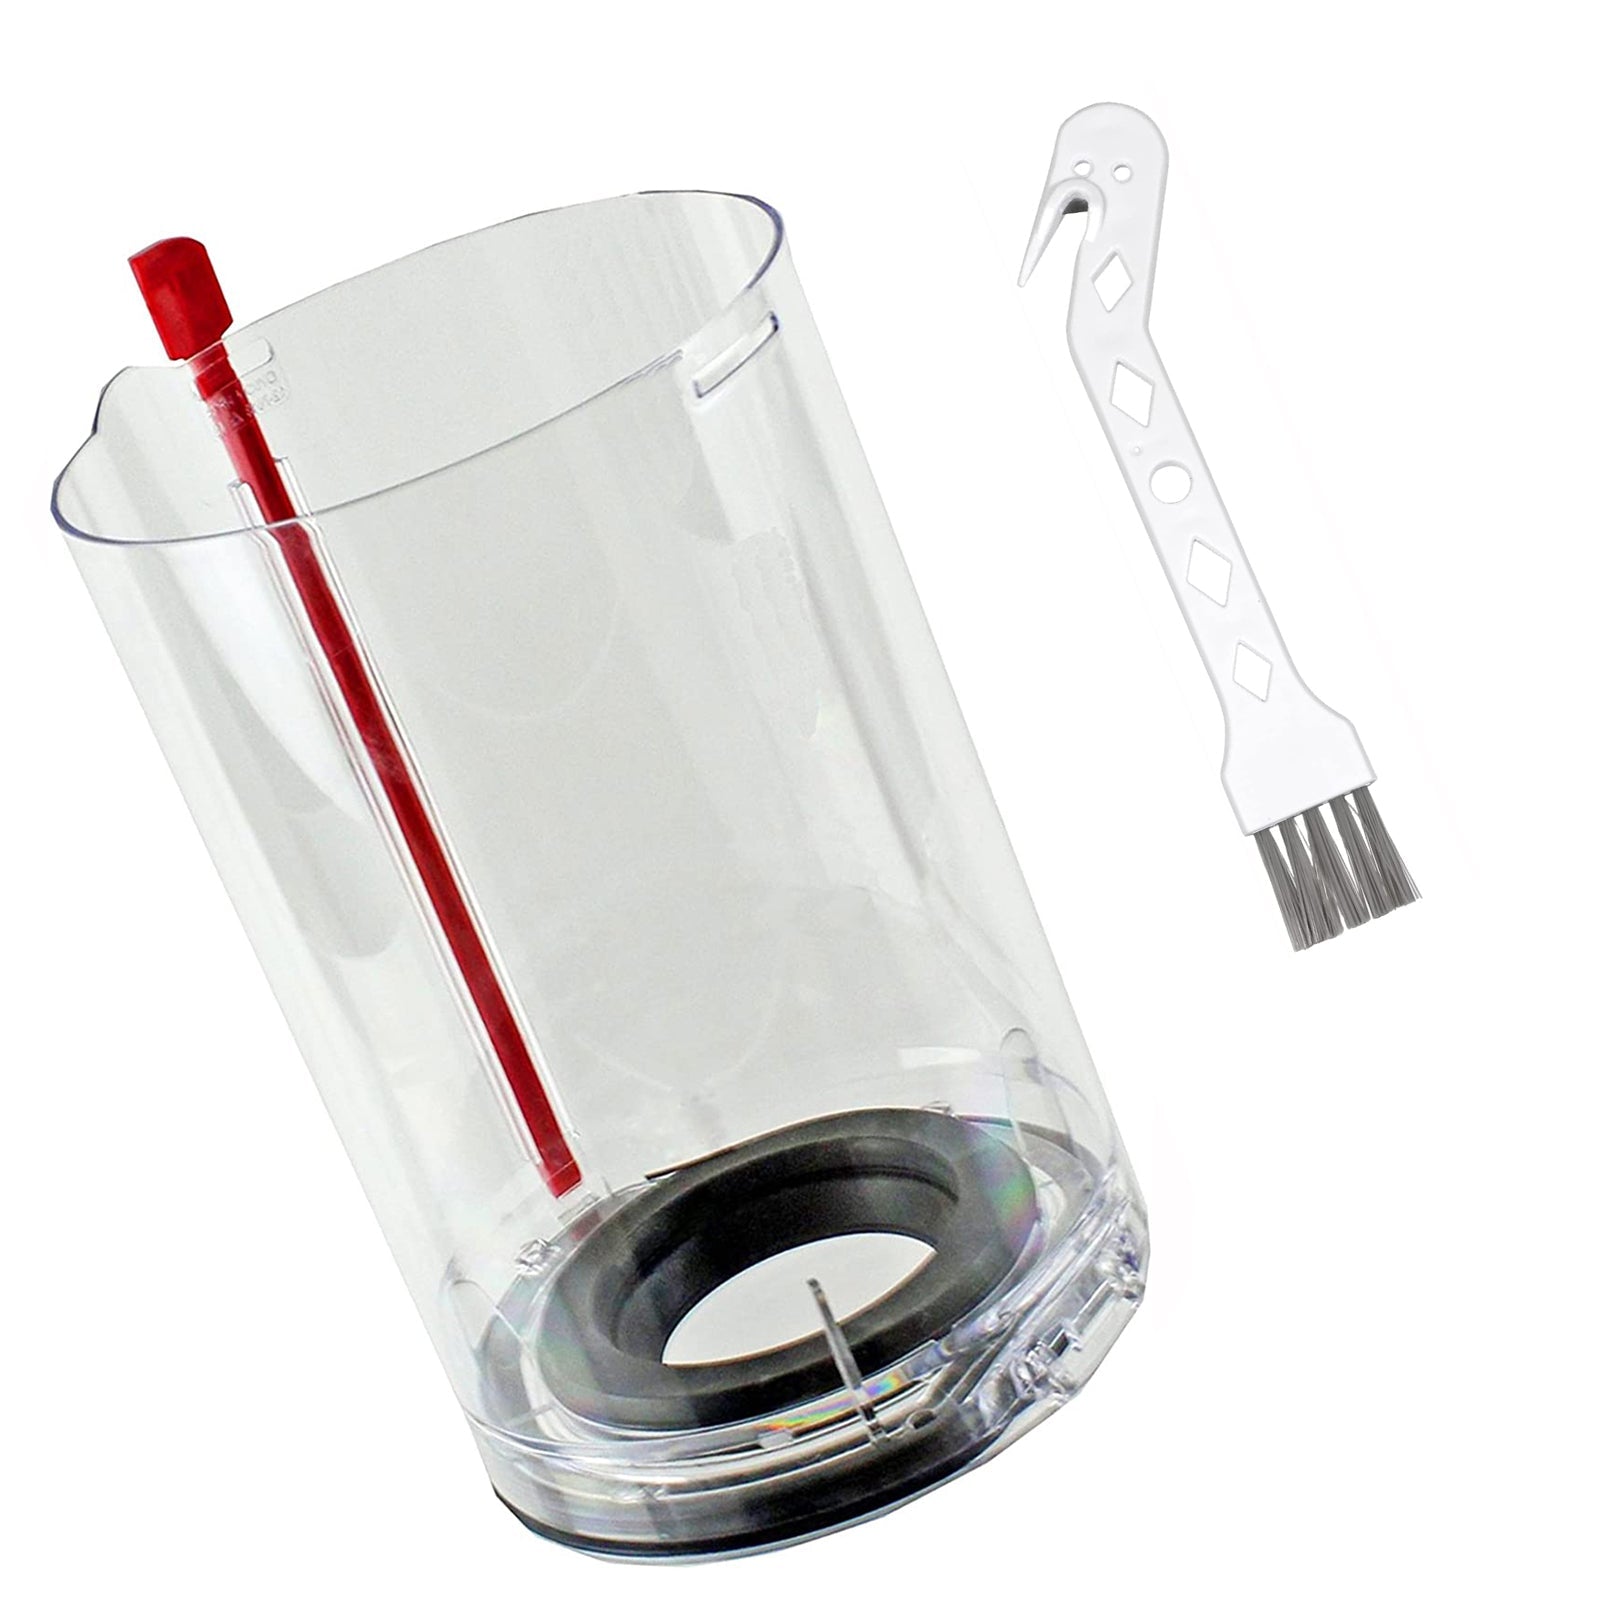 Dirt Bin for DYSON DC50 Animal Small Ball Vacuum 965070-01 + Cleaning Brush